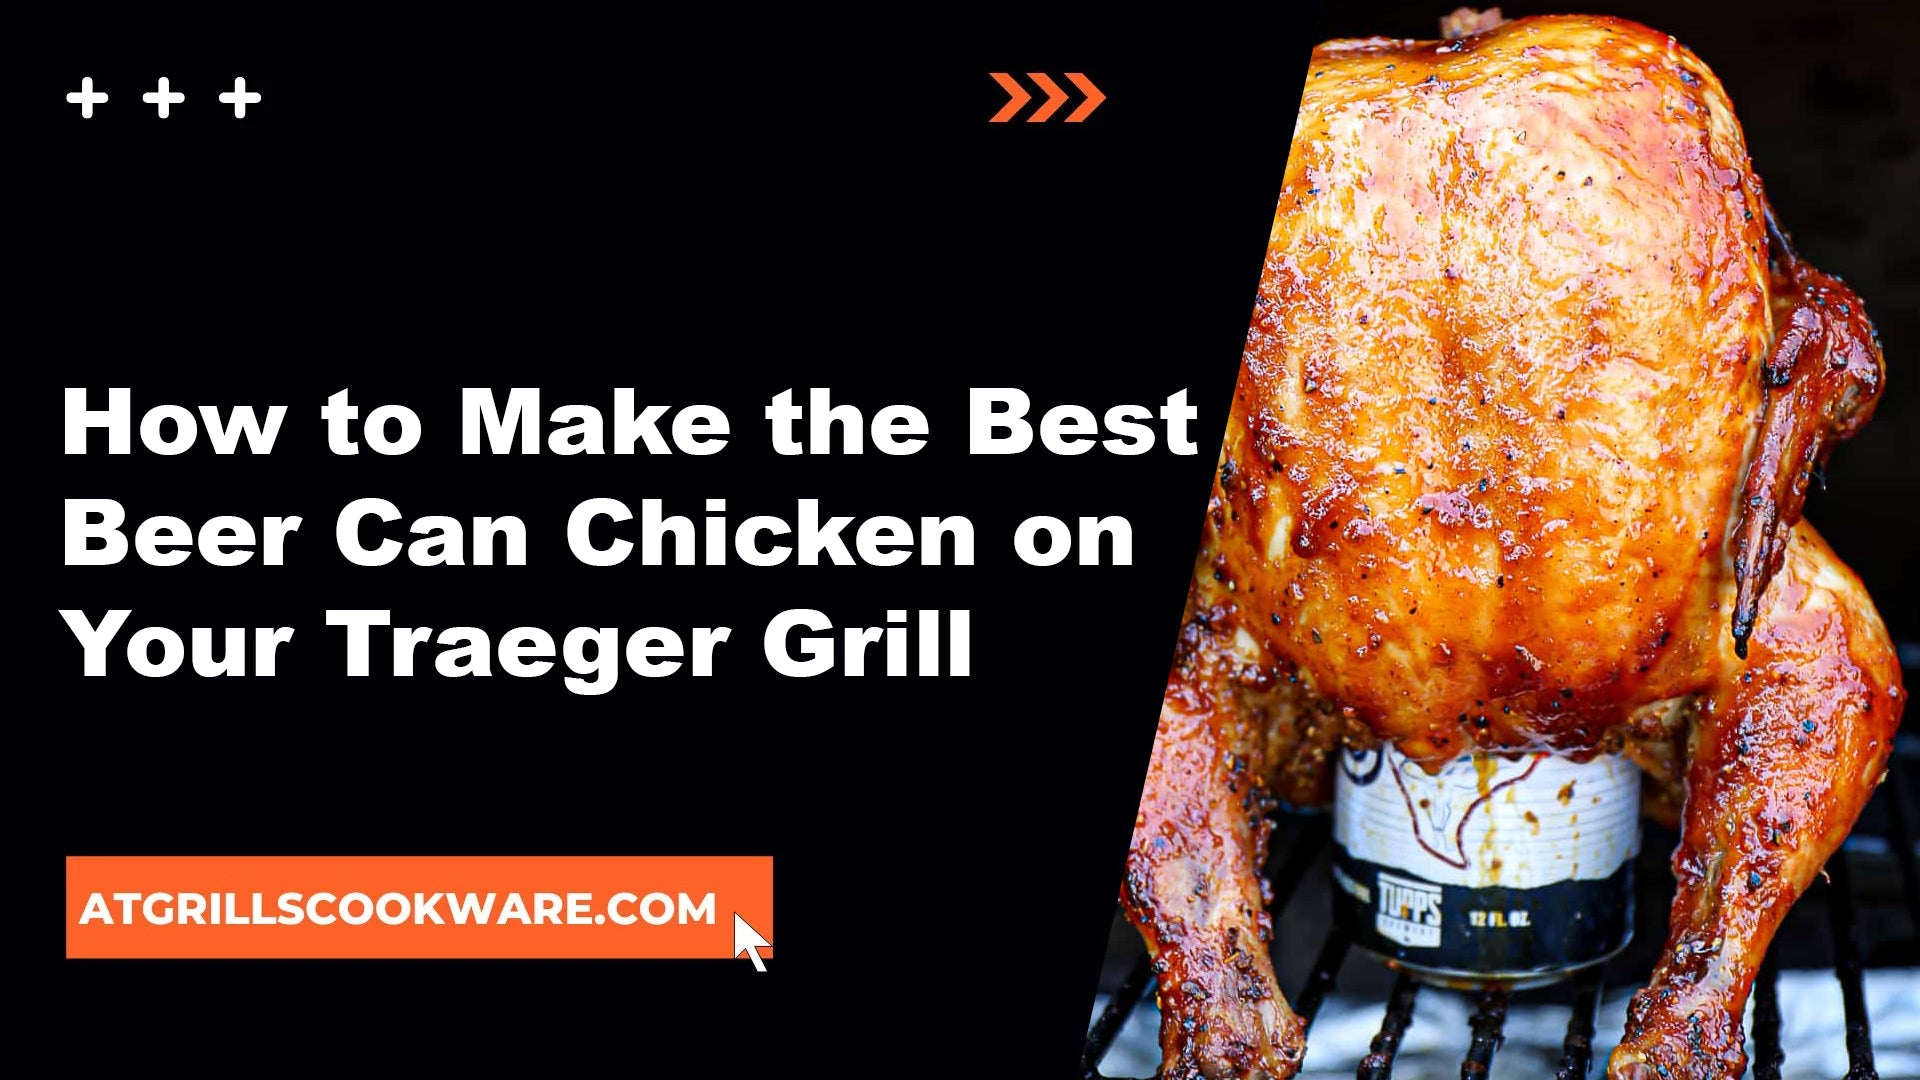 How to Make the Best Beer Can Chicken on Your Traeger Grill